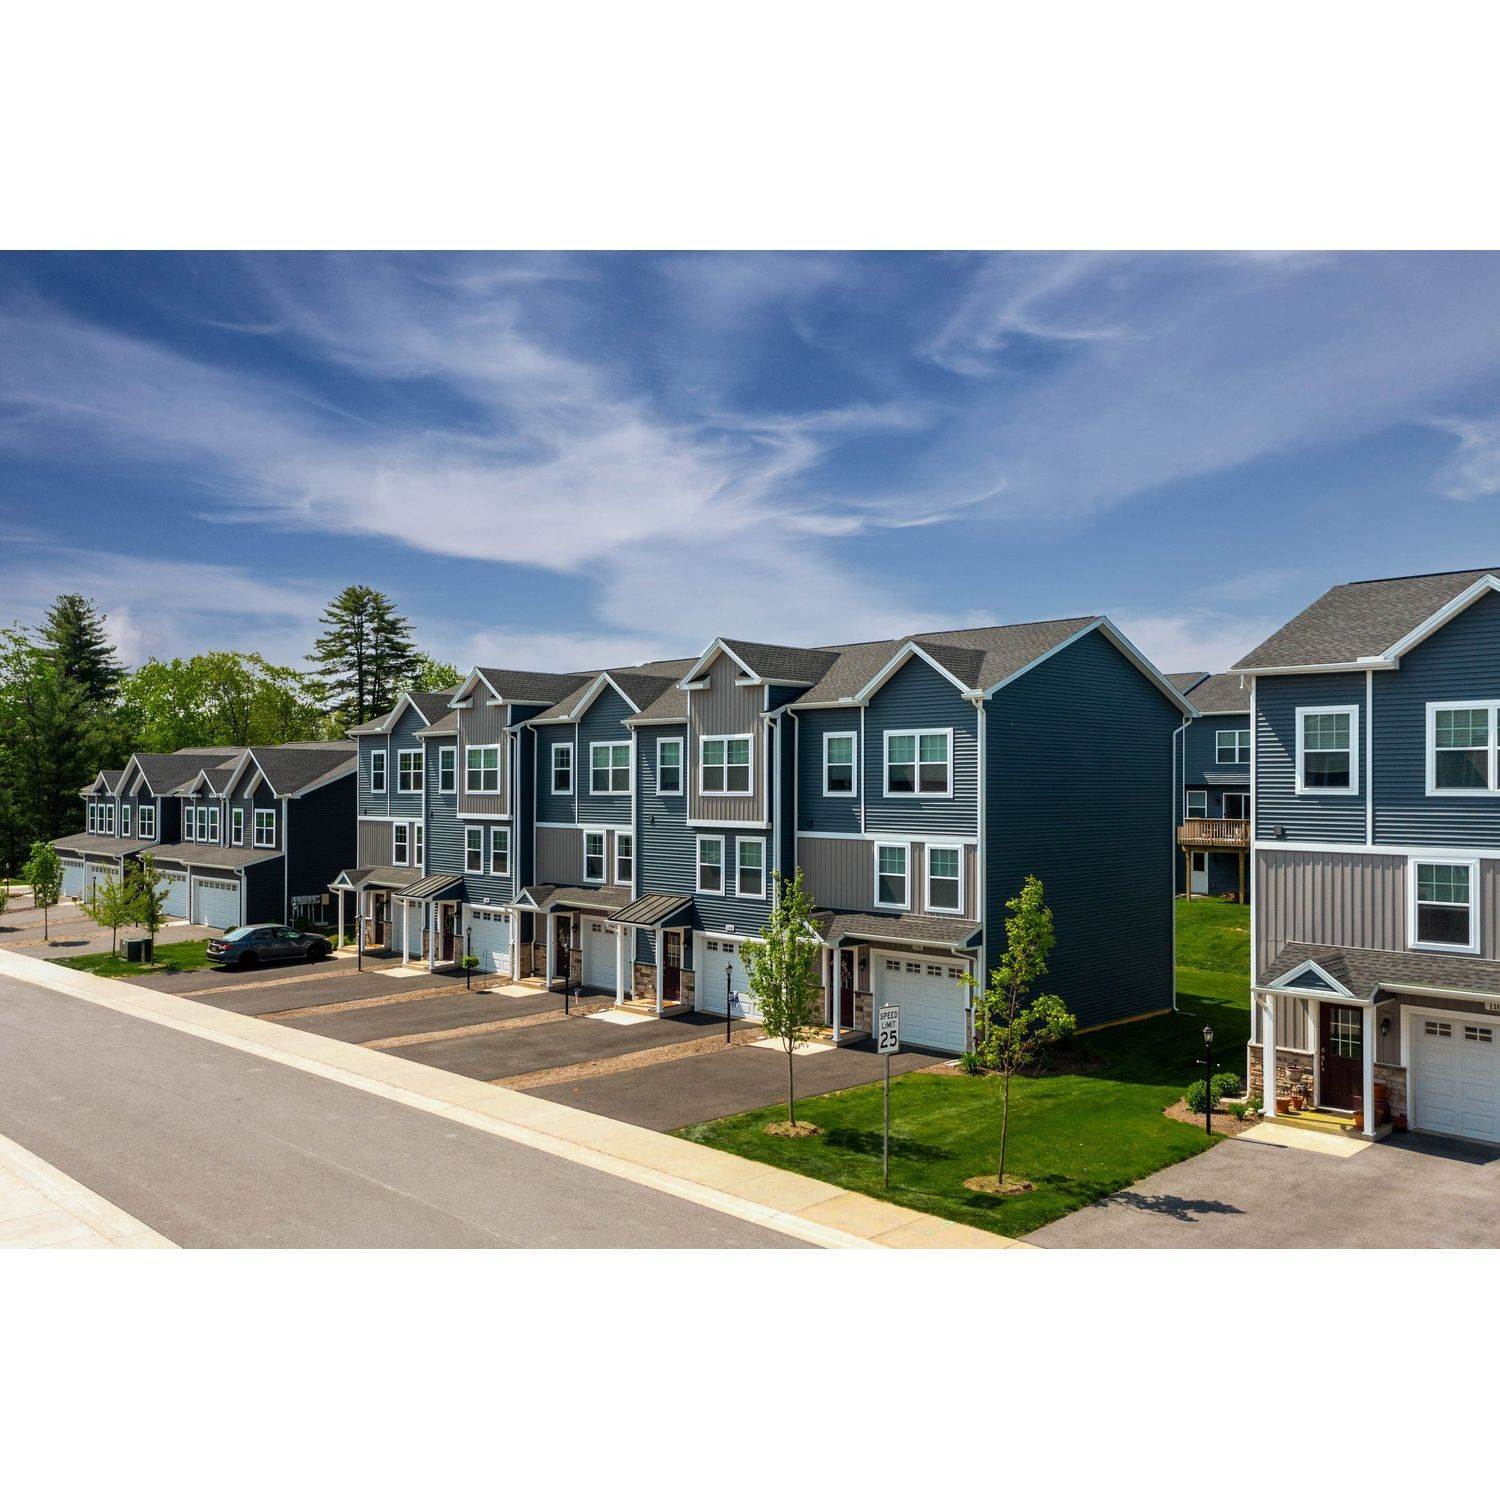 Grays Pointe - Townhomes building at 115 Amicus Drive, Port Matilda, PA 16870